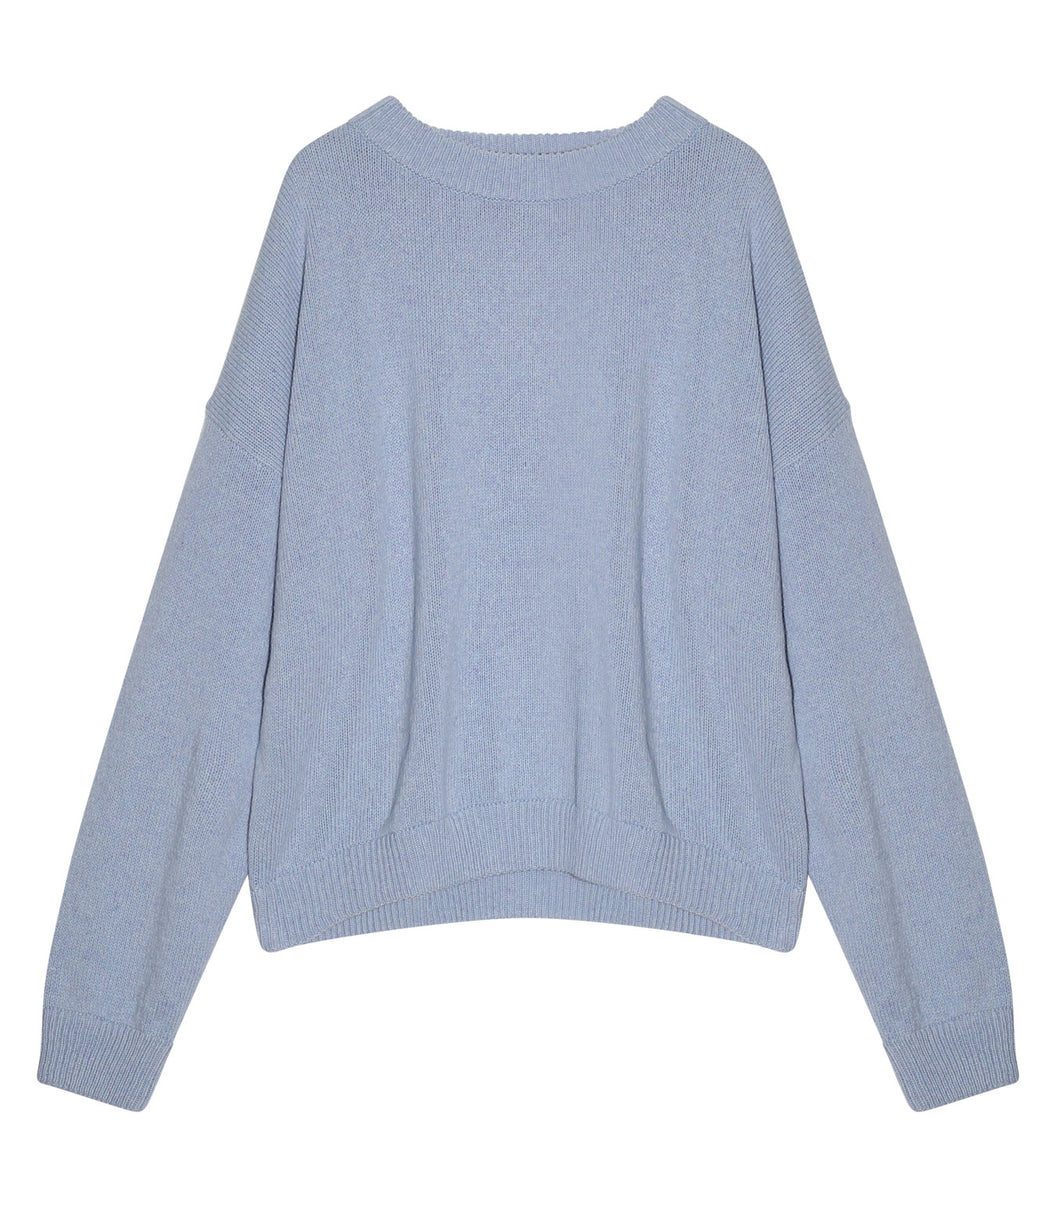 Isìmo Recycled Cashmere Crew Neck Sweater